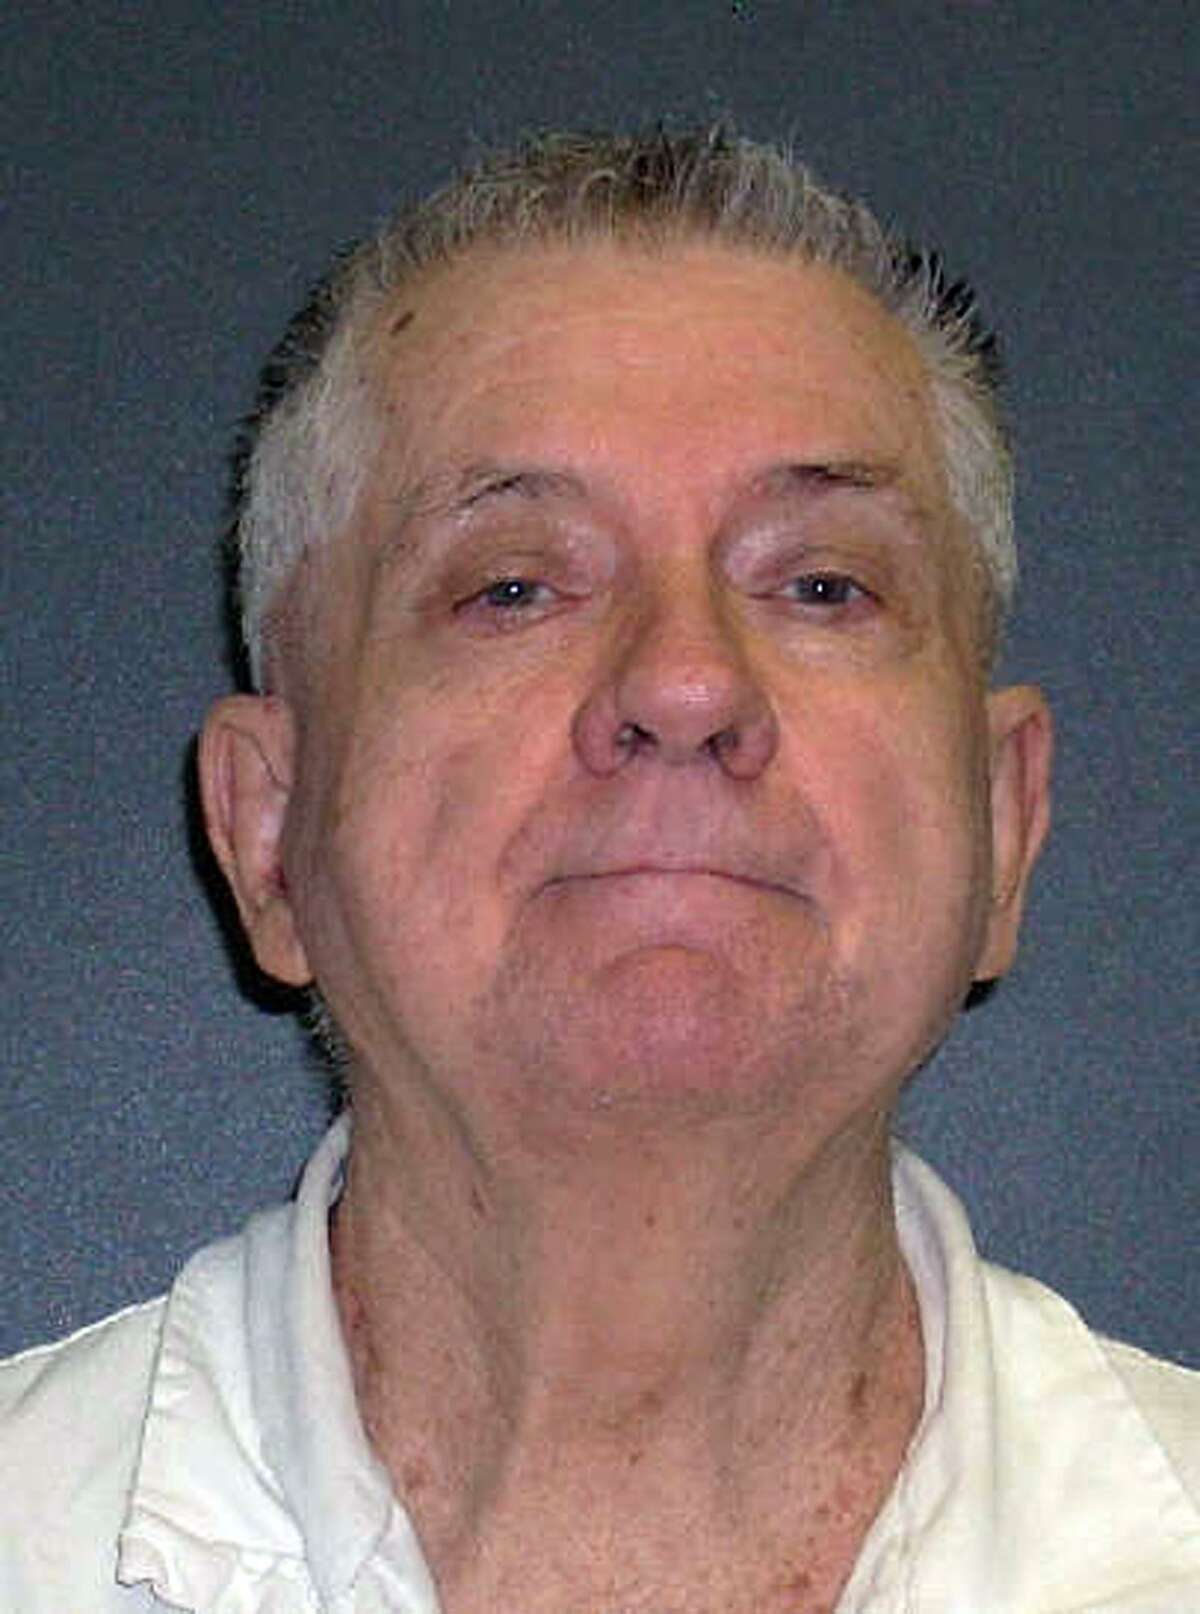 This September 2010 photo provided by the Texas Department of Criminal Justice via the Houston Chronicle shows Edward Harold Bell. Bell, an admitted sex offender, convicted murderer and self-described serial killer, has given multiple chilling confessions from his locked prison cell of abducting and slaying teenage and adolescent girls in the 1970s, describing crimes even now unsolved. He calls his victims the "Eleven that went to Heaven." (AP Photo/Texas Department of Criminal Justice via the Houston Chronicle)